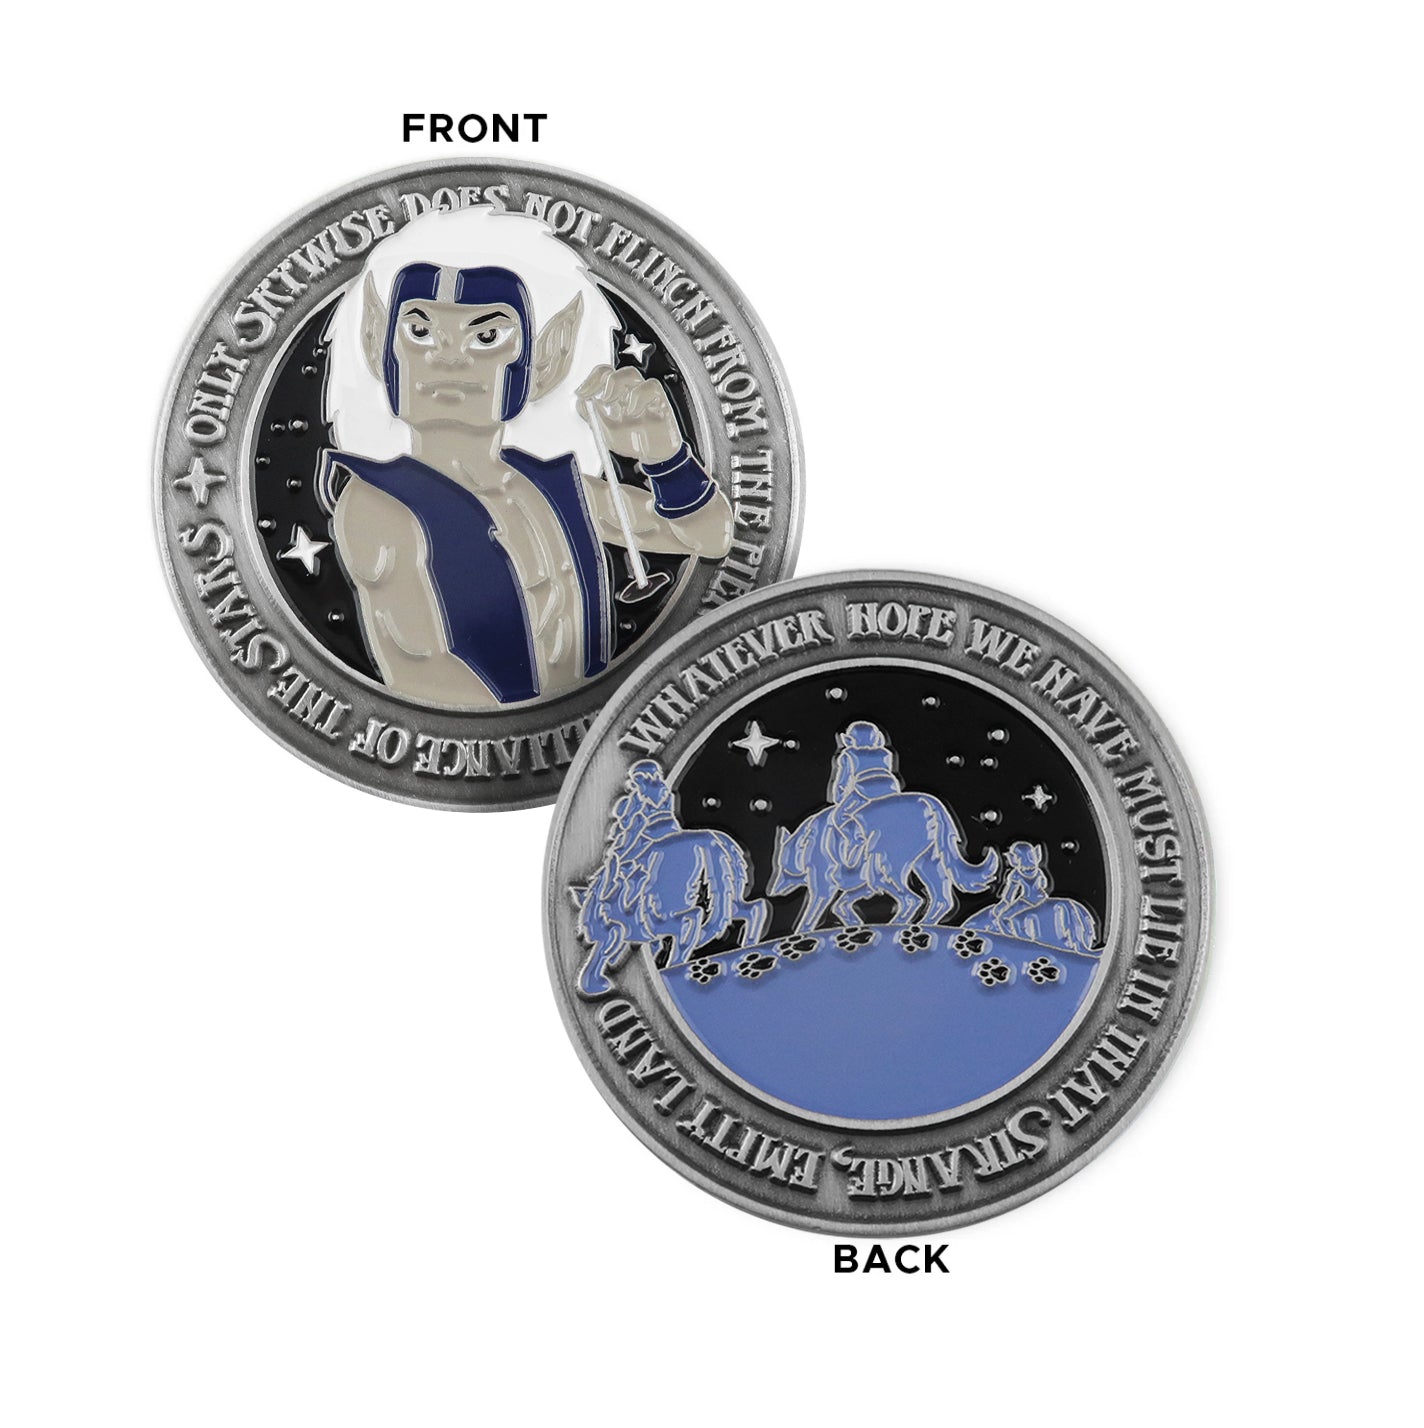 Front and back images of a brass challenge coin The front of the coin depicts the ElfQuest character Skywise, with raised text saying “only “Skywise does not flinch from the piercing brilliance of the stars” around the edge. The back depicts a elves riding on wolves in blue on black, with raised text saying “whatever hope we have must lie in that strange, empty land.”